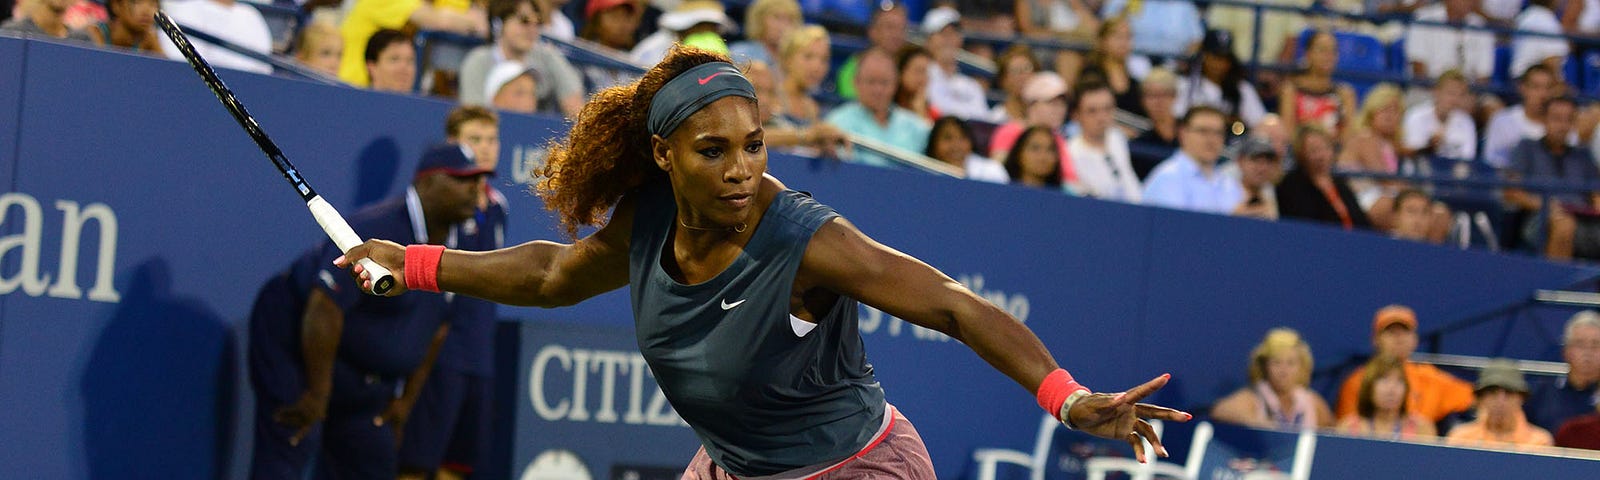 Serena Williams playing at the US Open 2013 about to hit a tennis ball